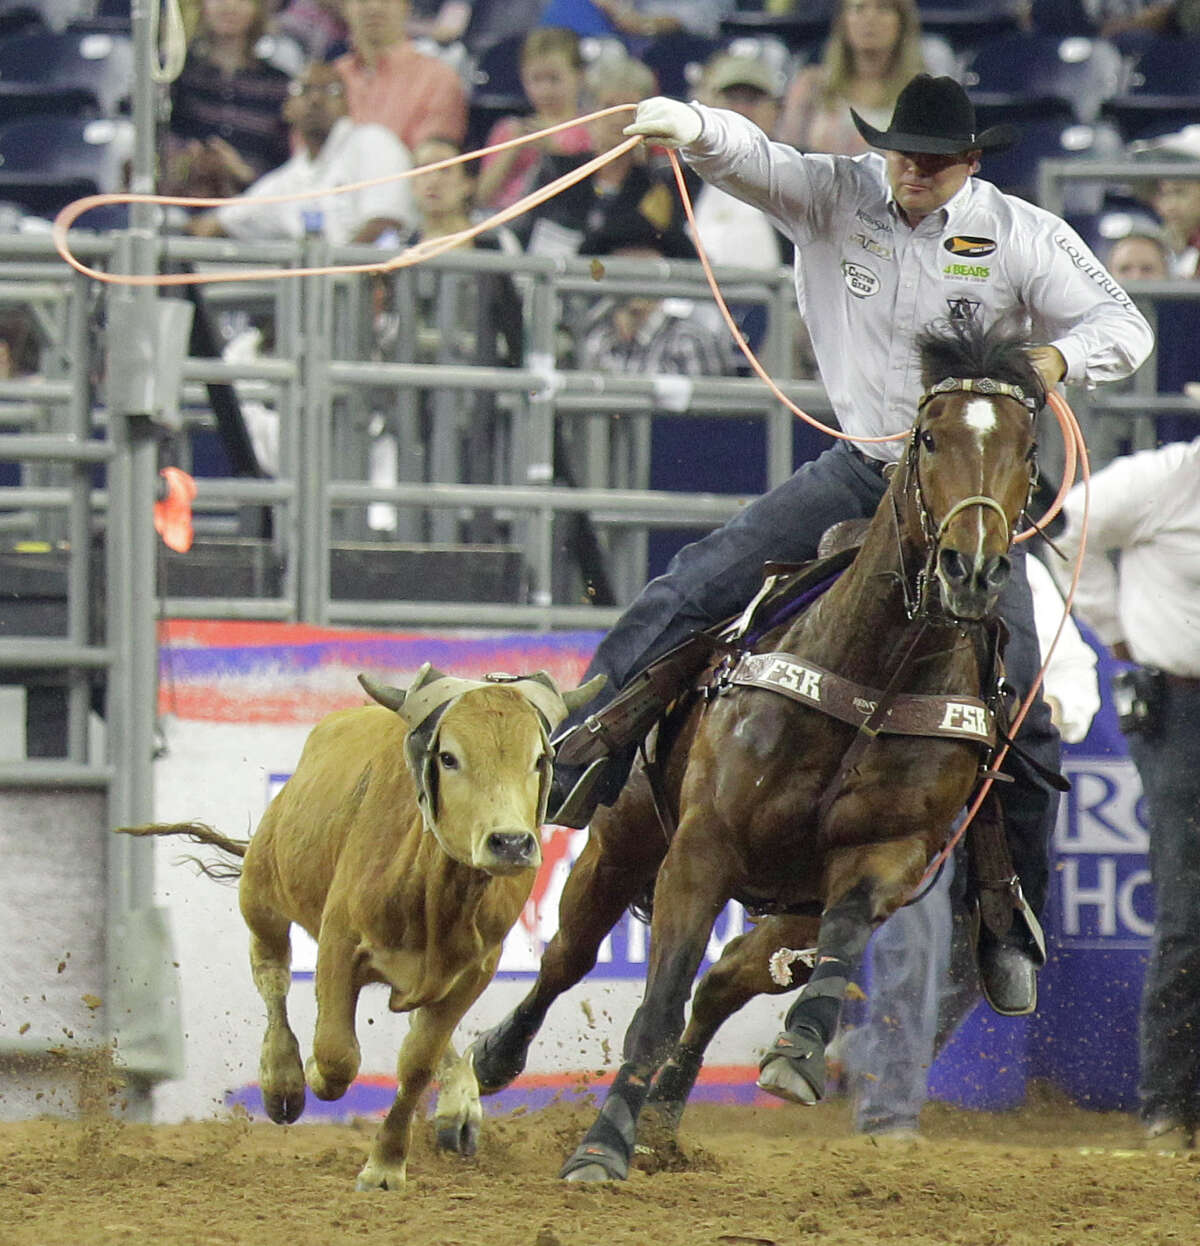 Meet the real athletes of the rodeo